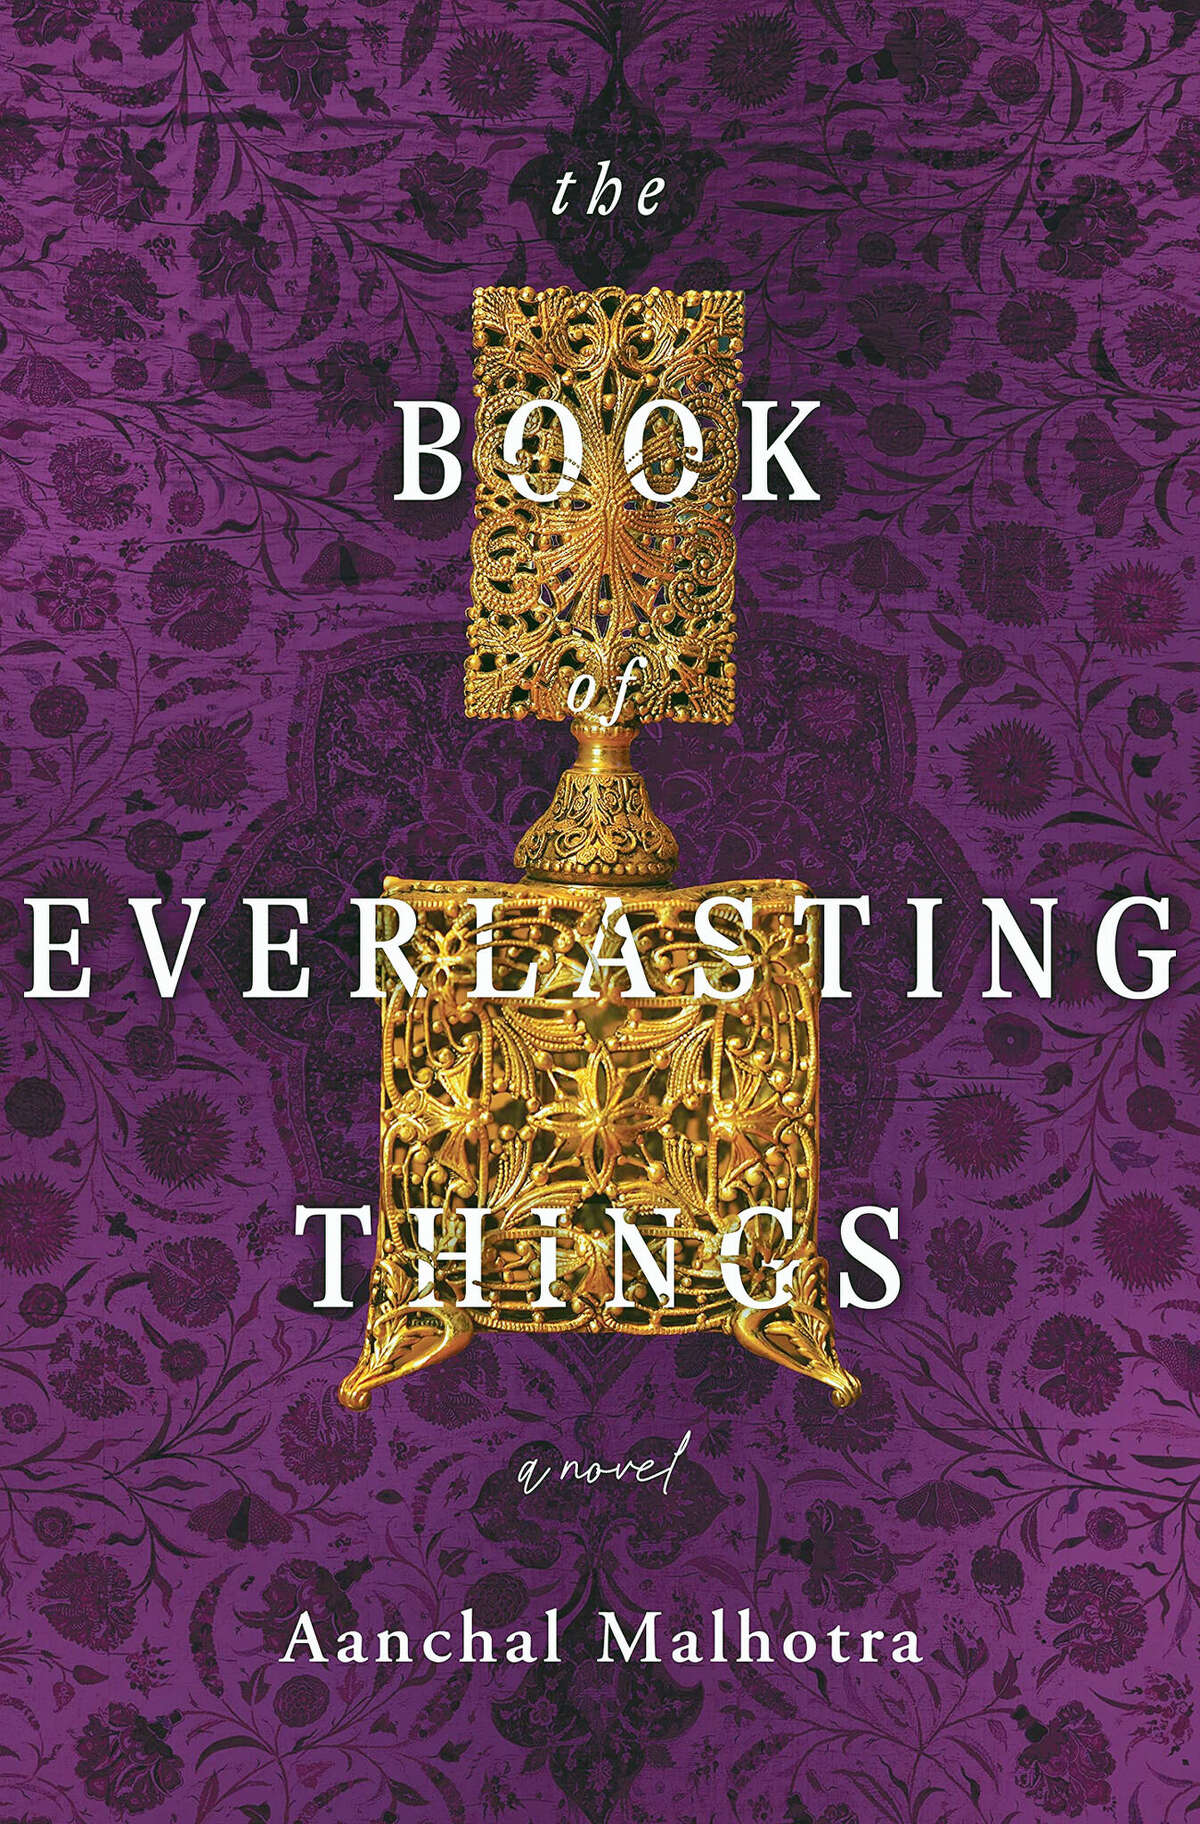 "The Book of Everlasting Things"